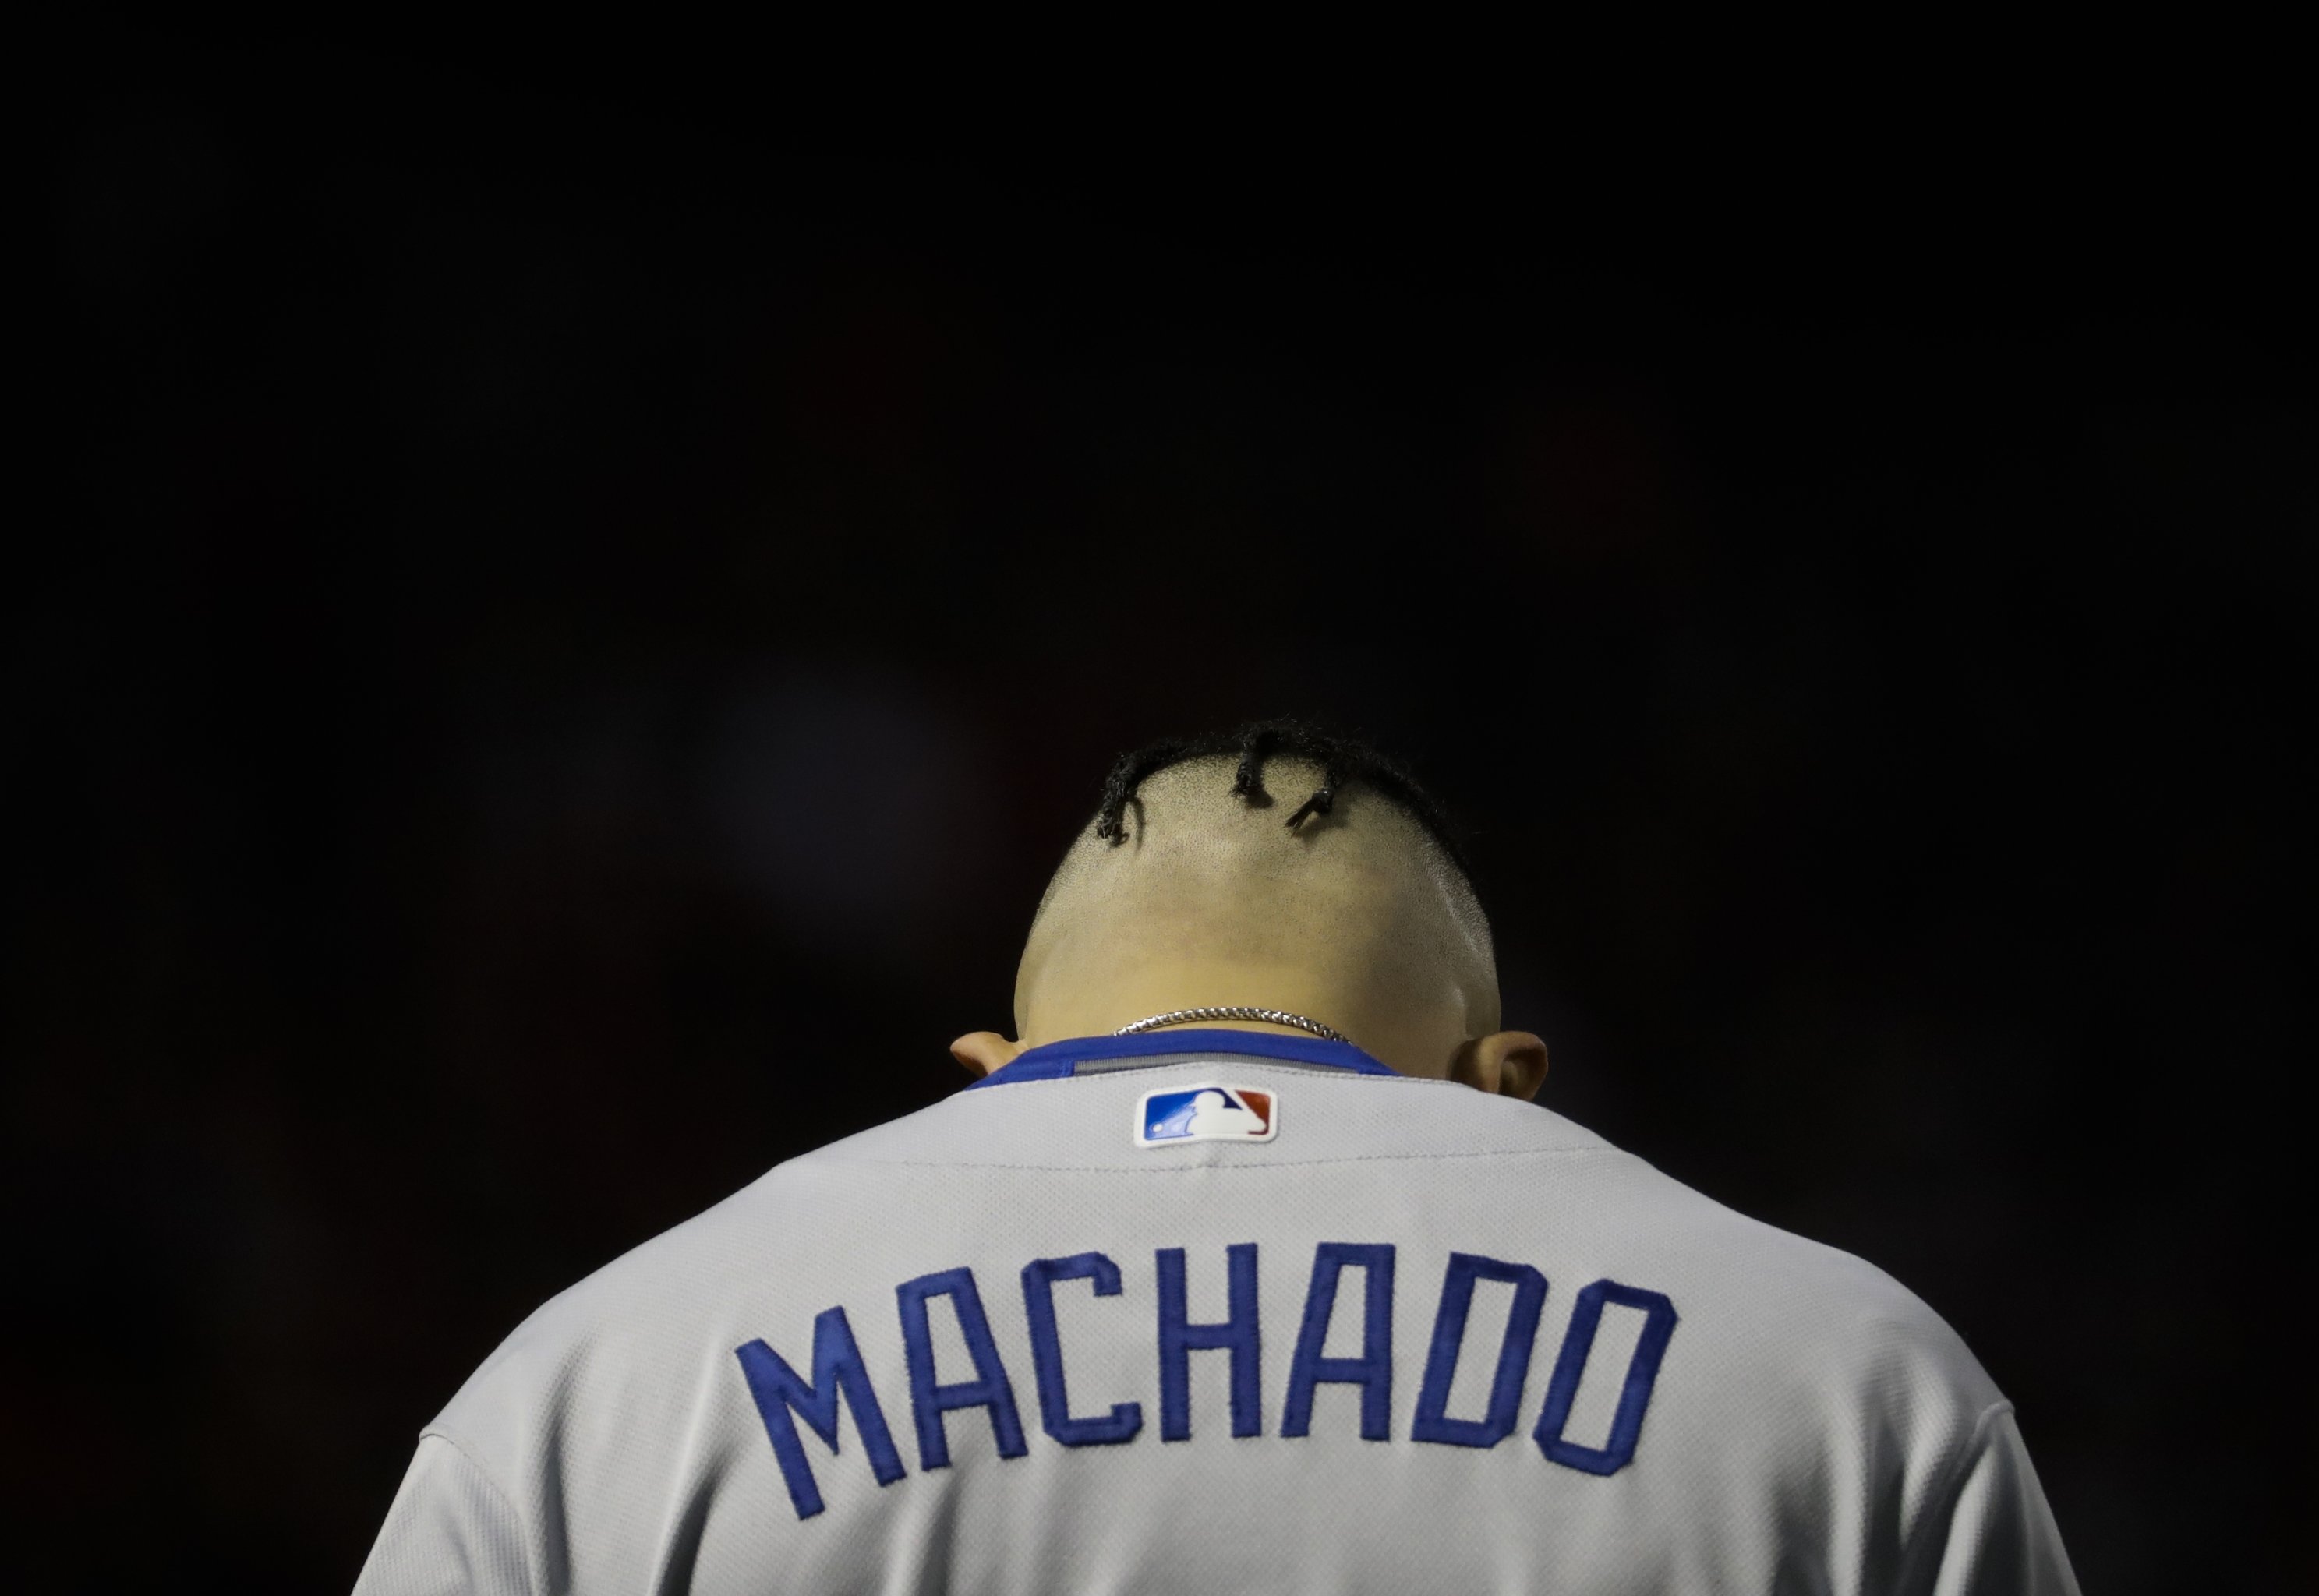 Manny Machado Gets His Payday, but It Won't Quell Free Agency